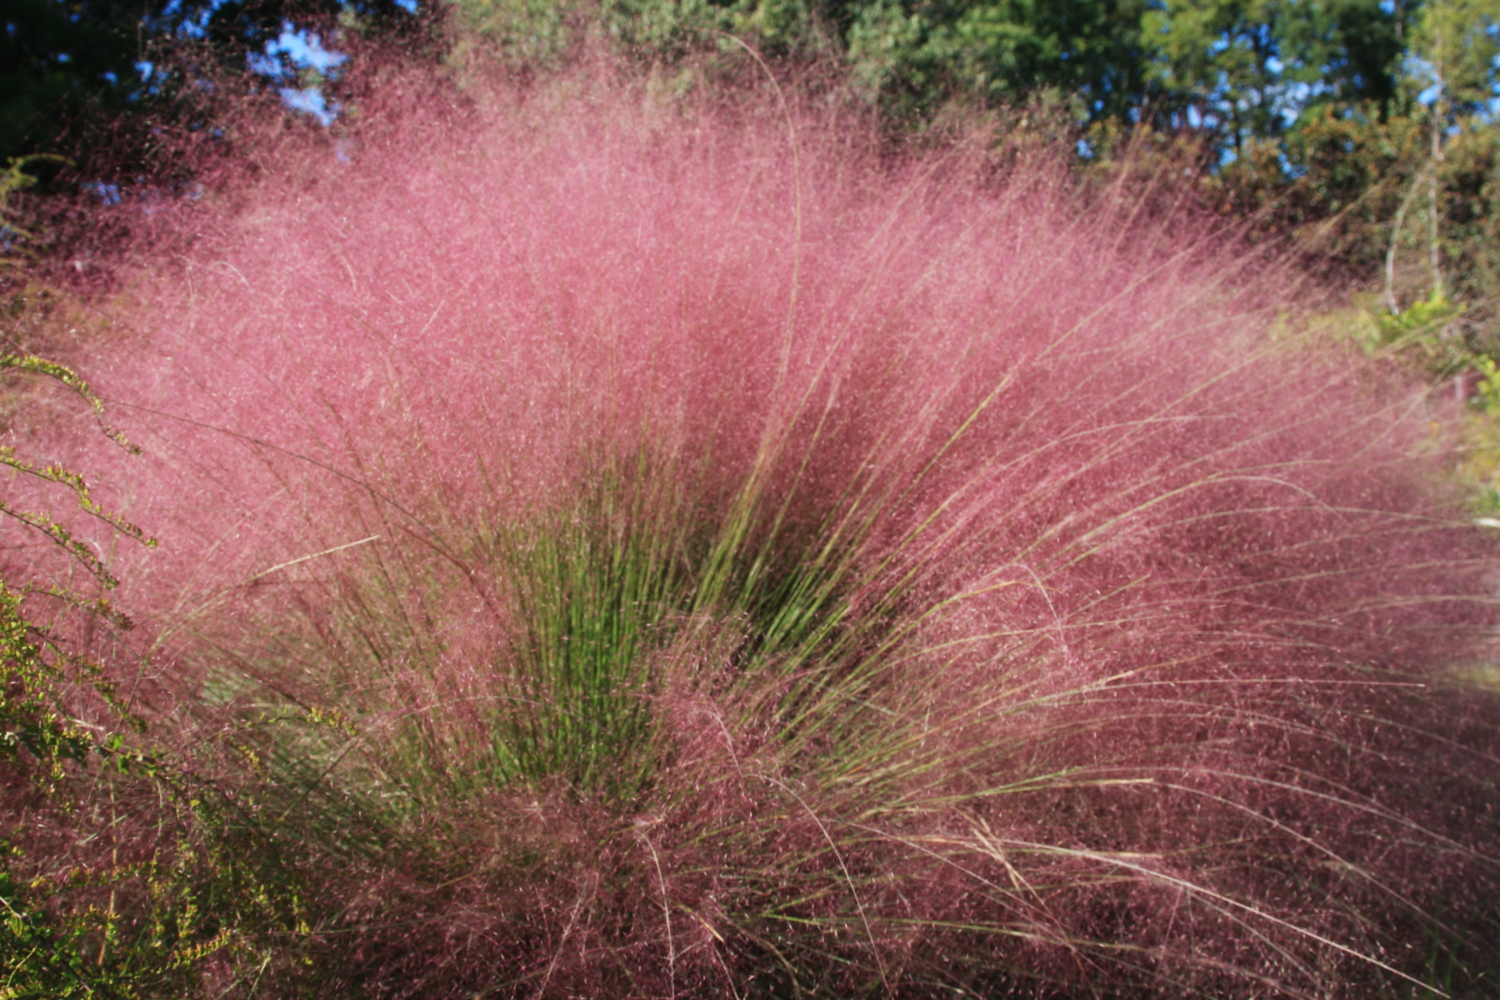 muhly grass in the promenade area